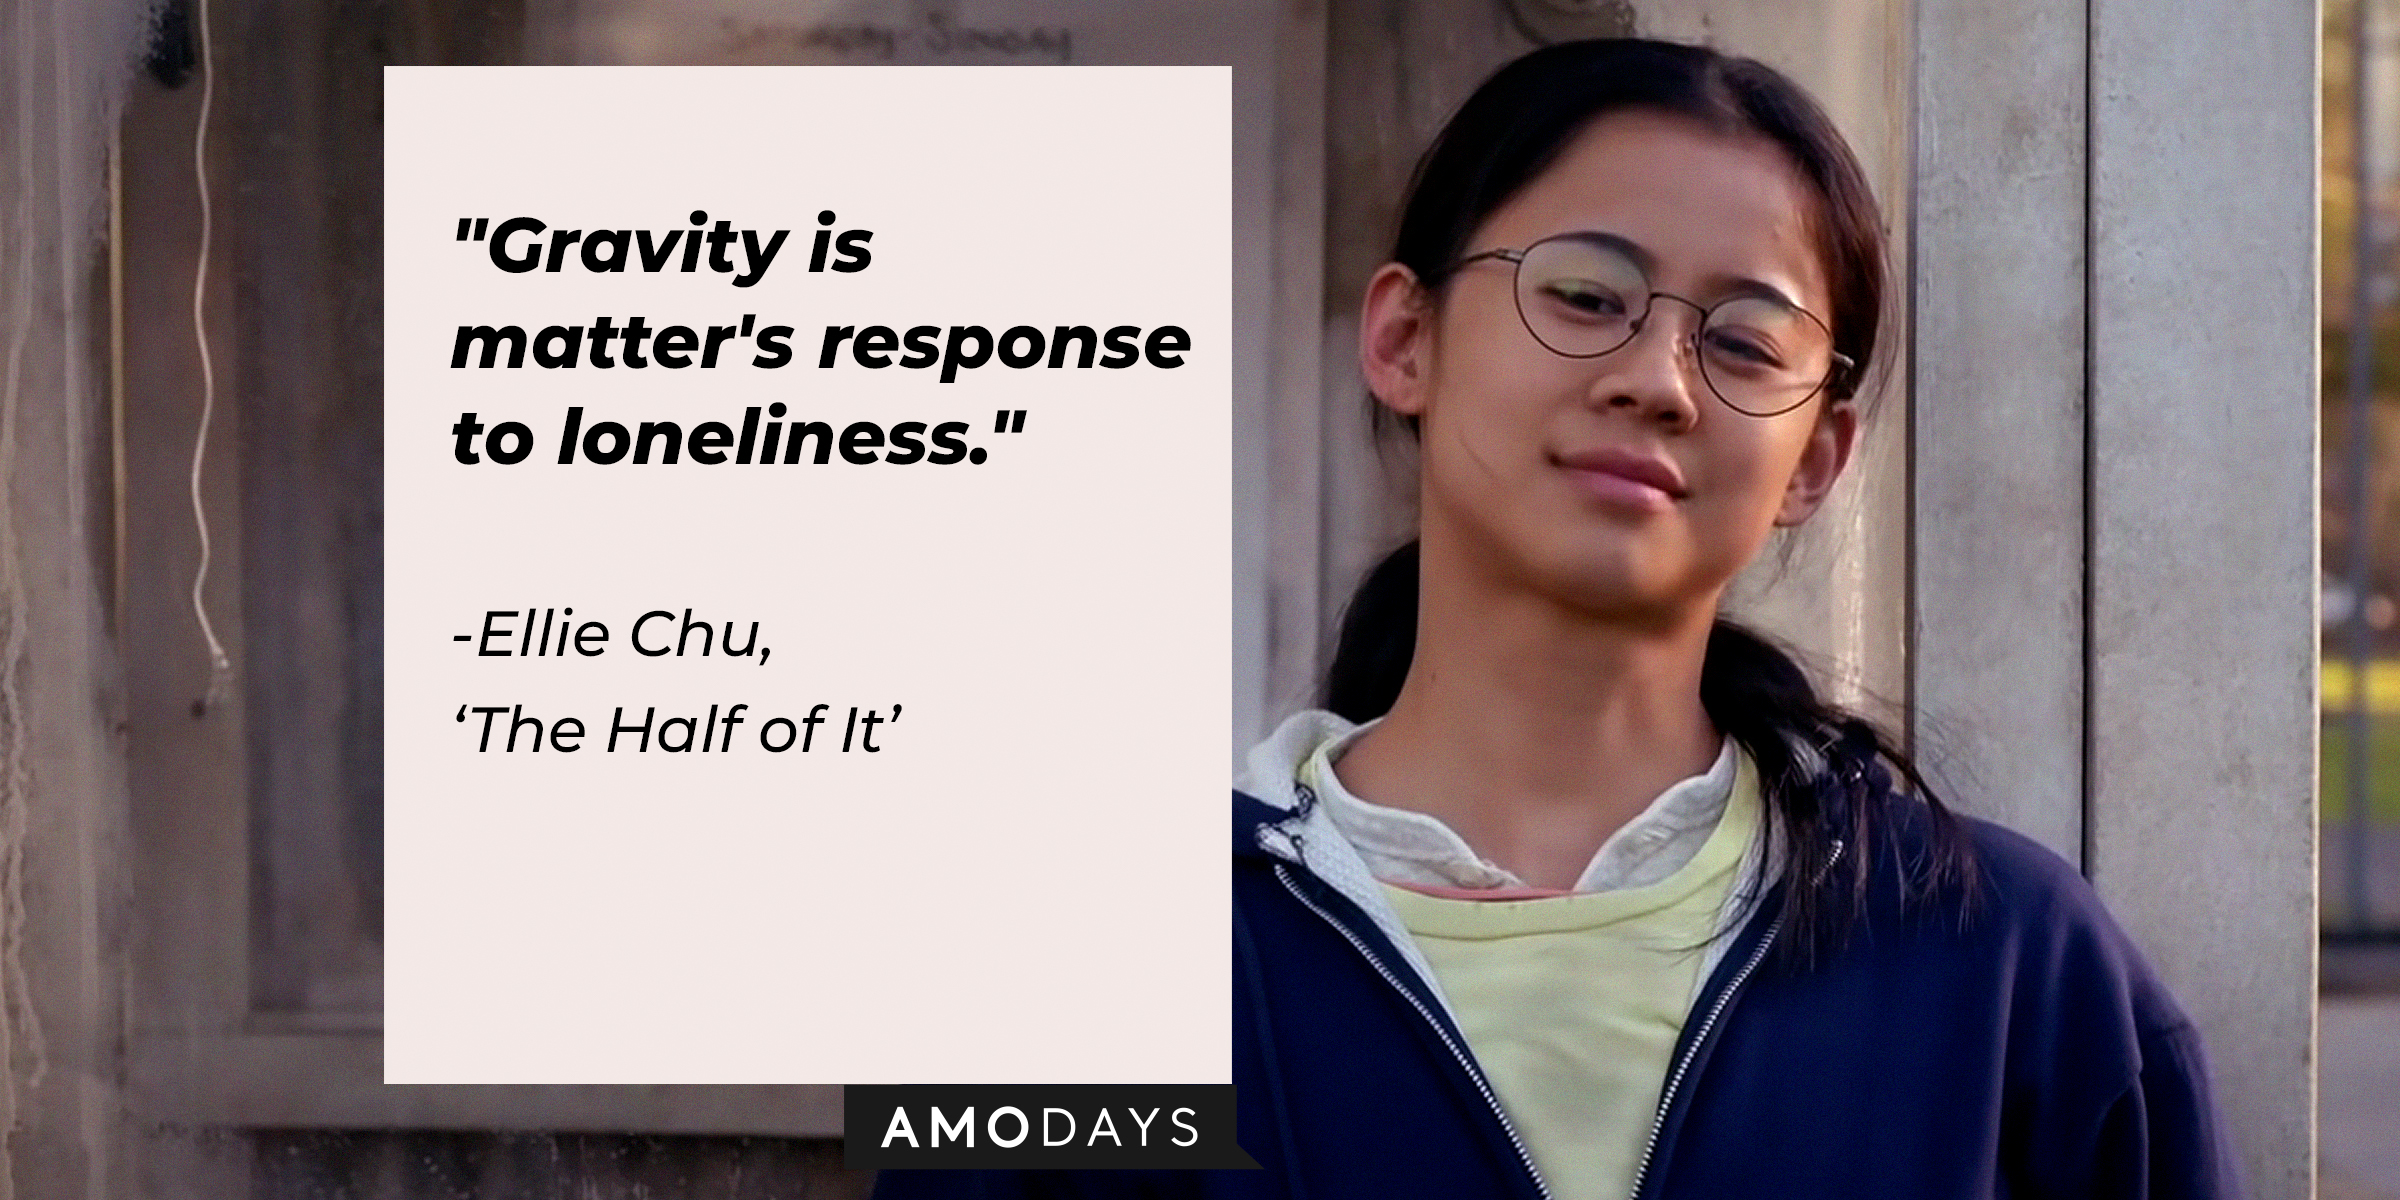 Ellie Chu with her quote, "Gravity is matter's response to loneliness." | Source: youtube.com/Netflix